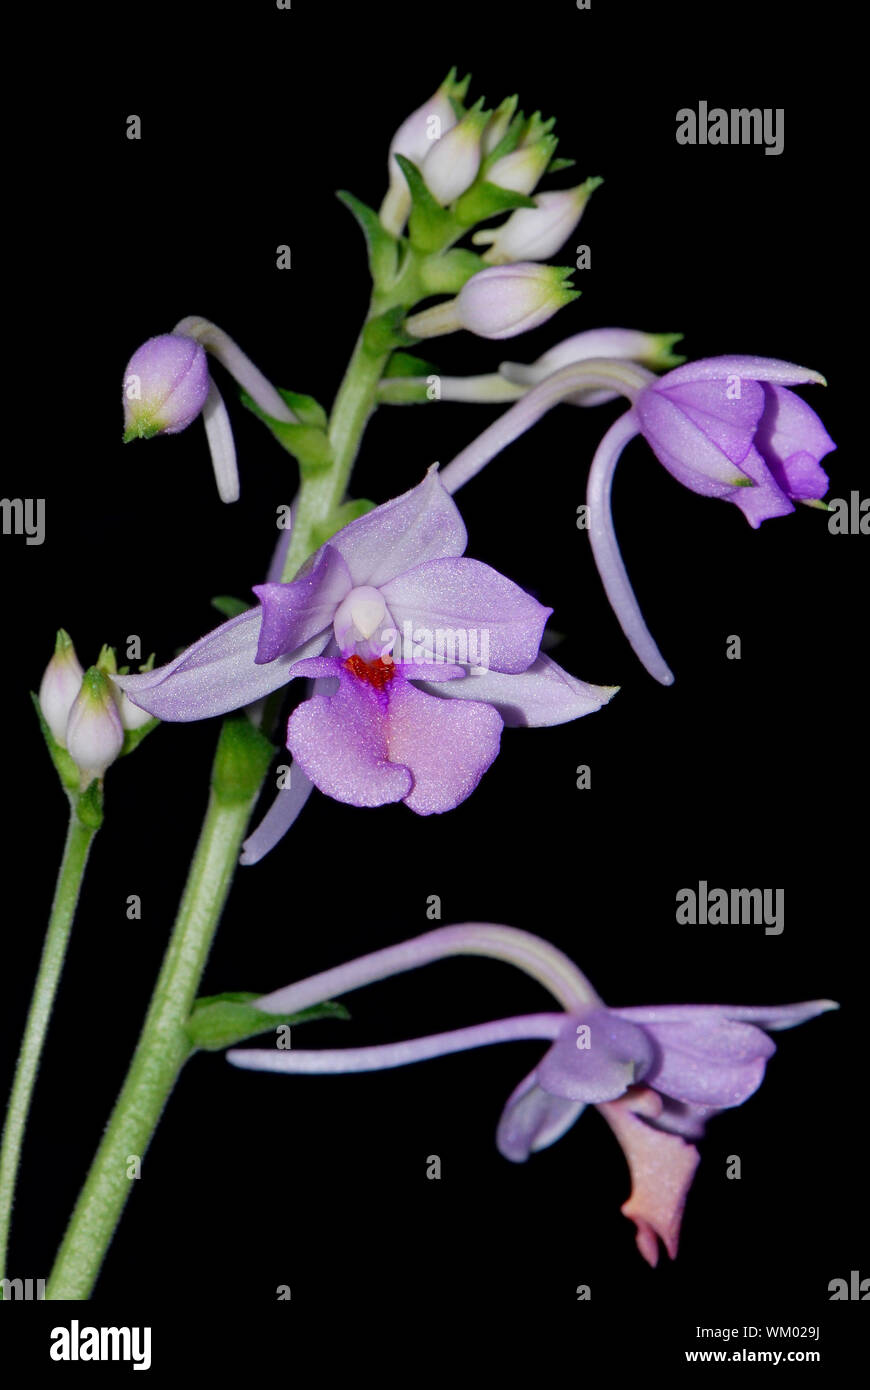 Beautiful purple ground orchid flower, Calanthe sylvatica or Calanthe masuca, isolated on a black background Stock Photo